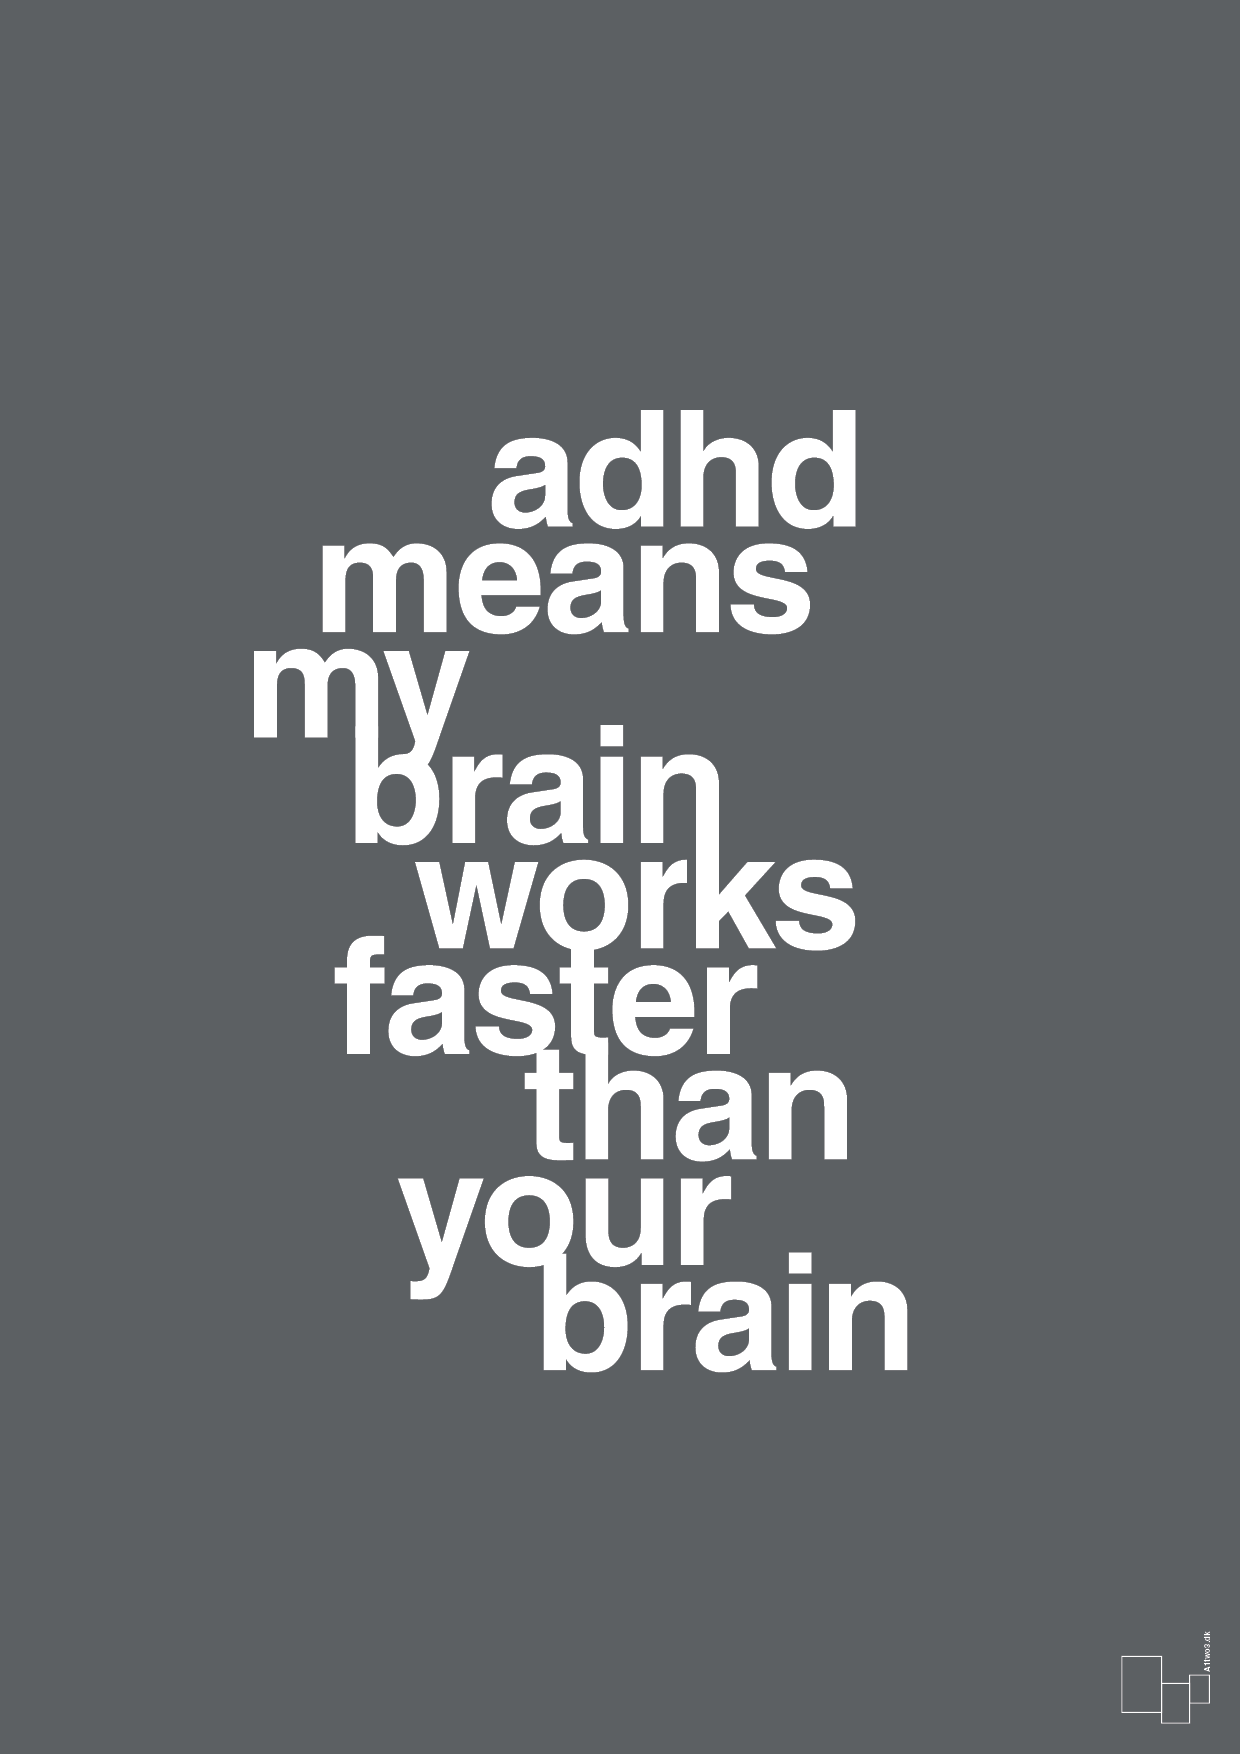 adhd means my brain works faster than your brain - Plakat med Samfund i Graphic Charcoal